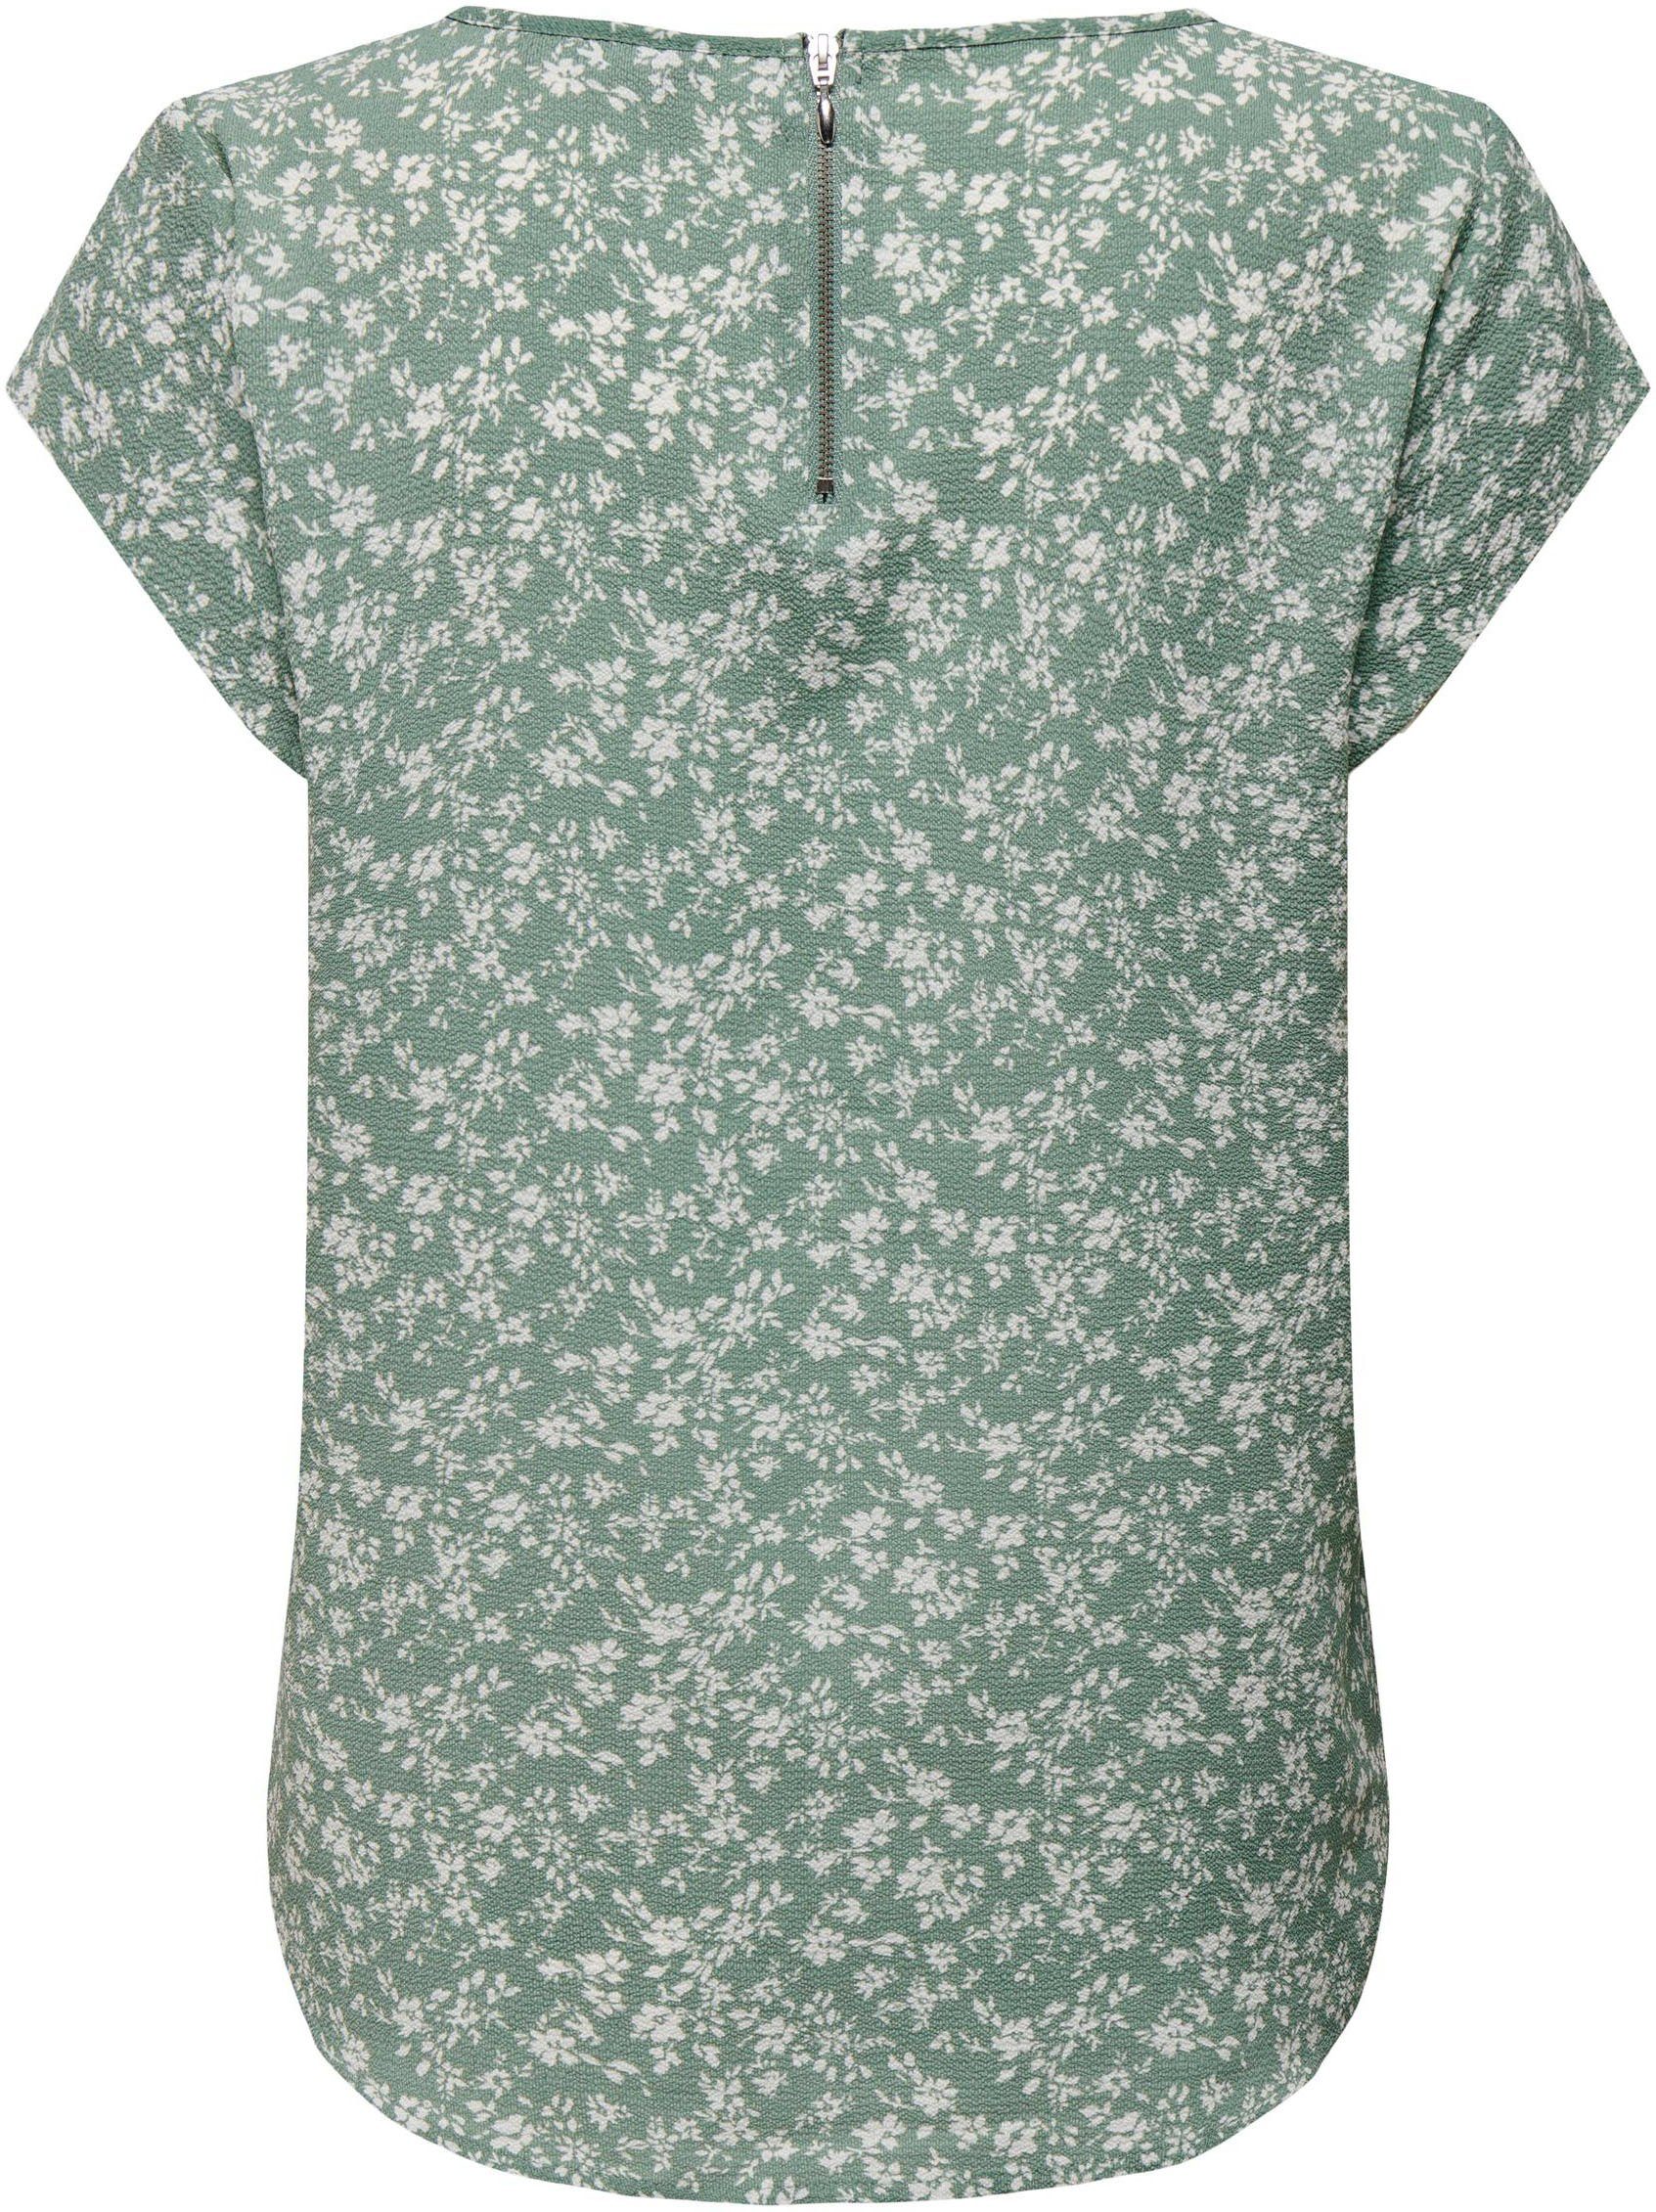 ONLY Shirtbluse ONLVIC S/S green Print AOP Lime TOP aop PTM NOOS mit